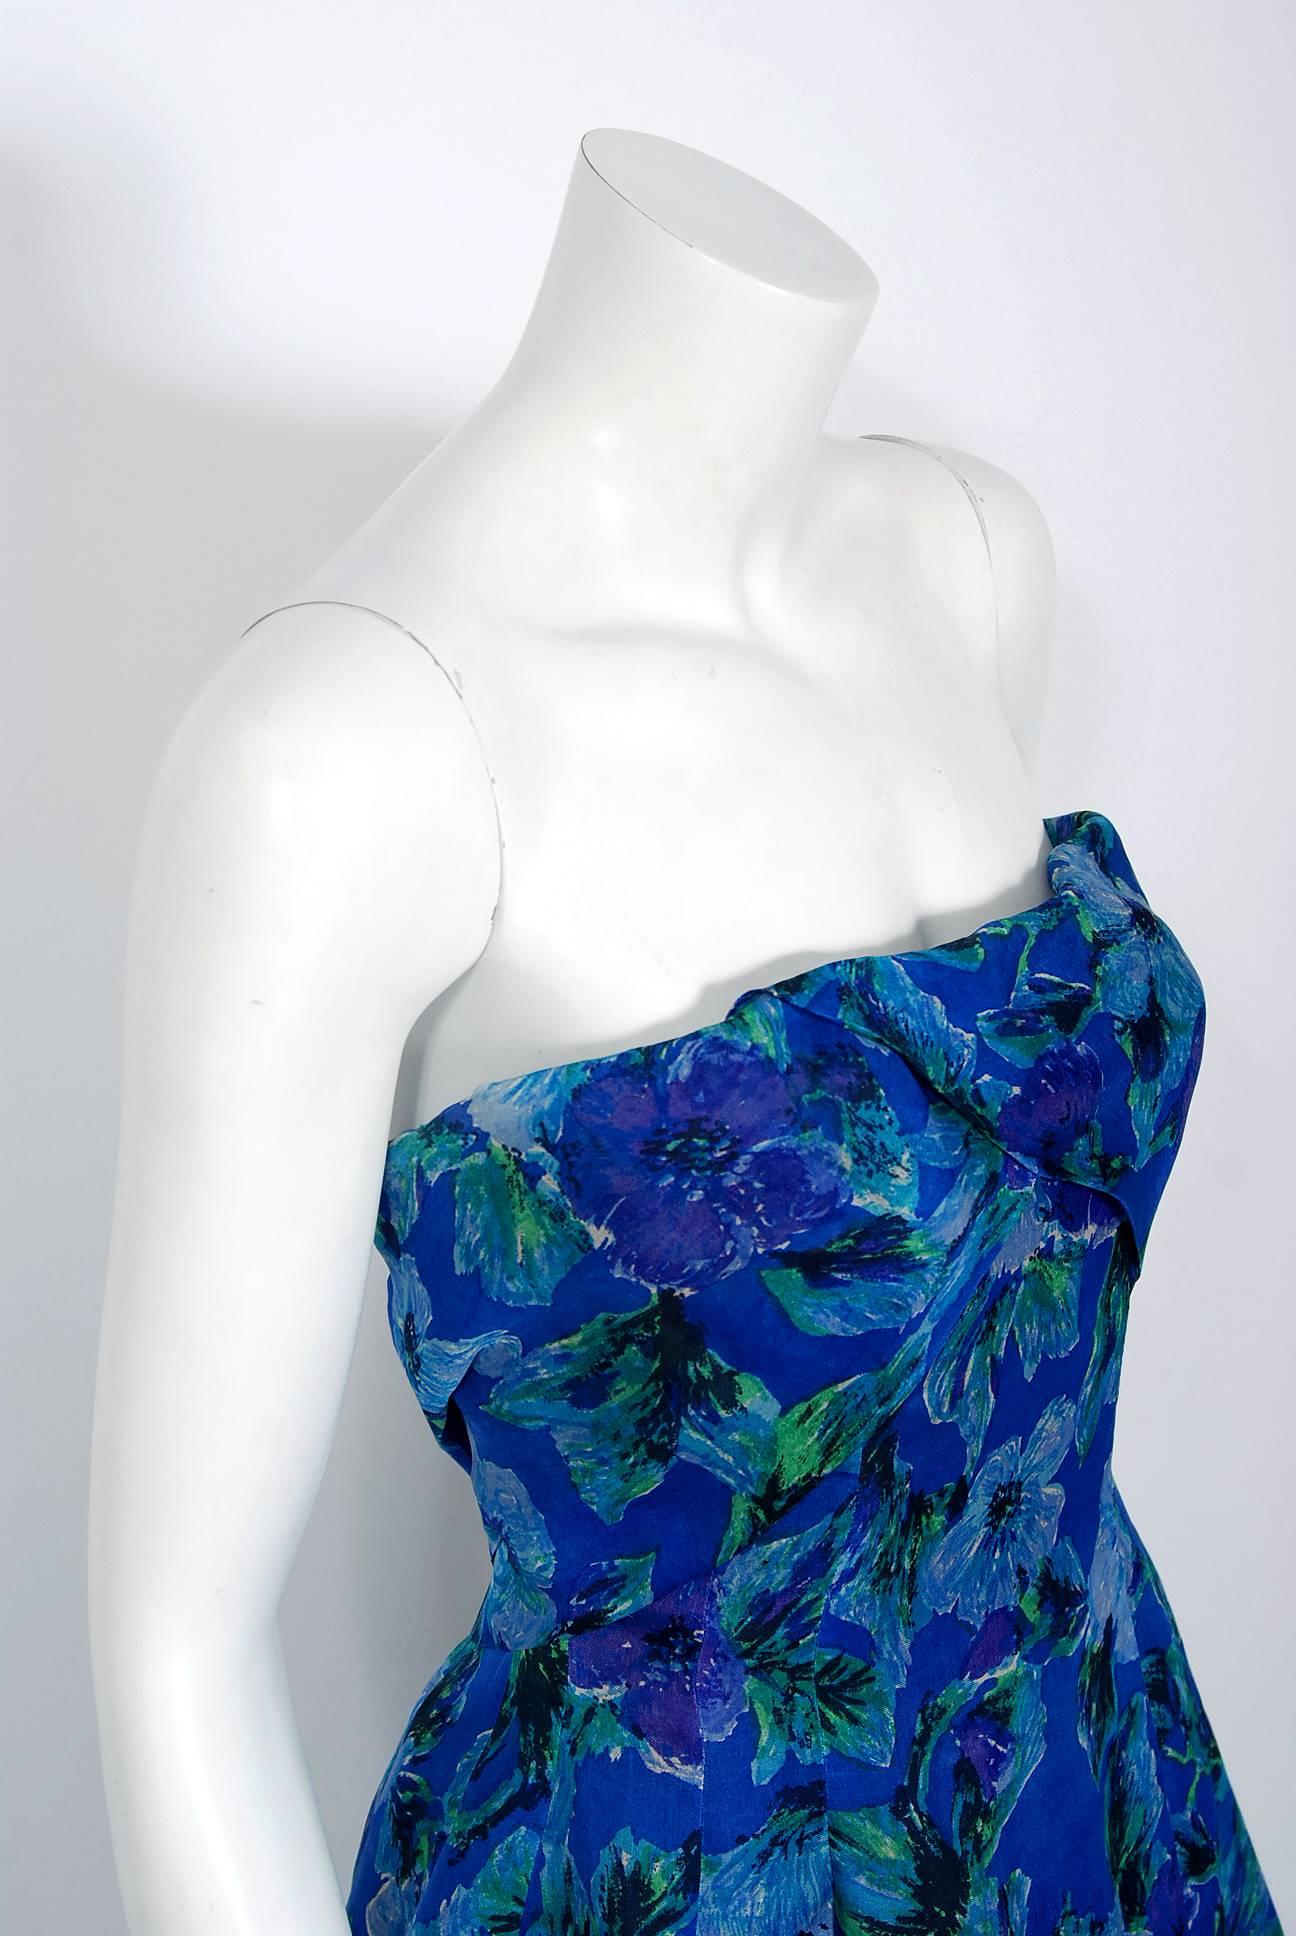 Breathtaking Pierre Balmain watercolor blue floral garden dress dating back to his 1958 collection. Pierre Balmain worked under Robert Pigiuet, Molyneux, and Lucian Lelong, where he worked closely with Christian Dior. In 1945 he finally opened his